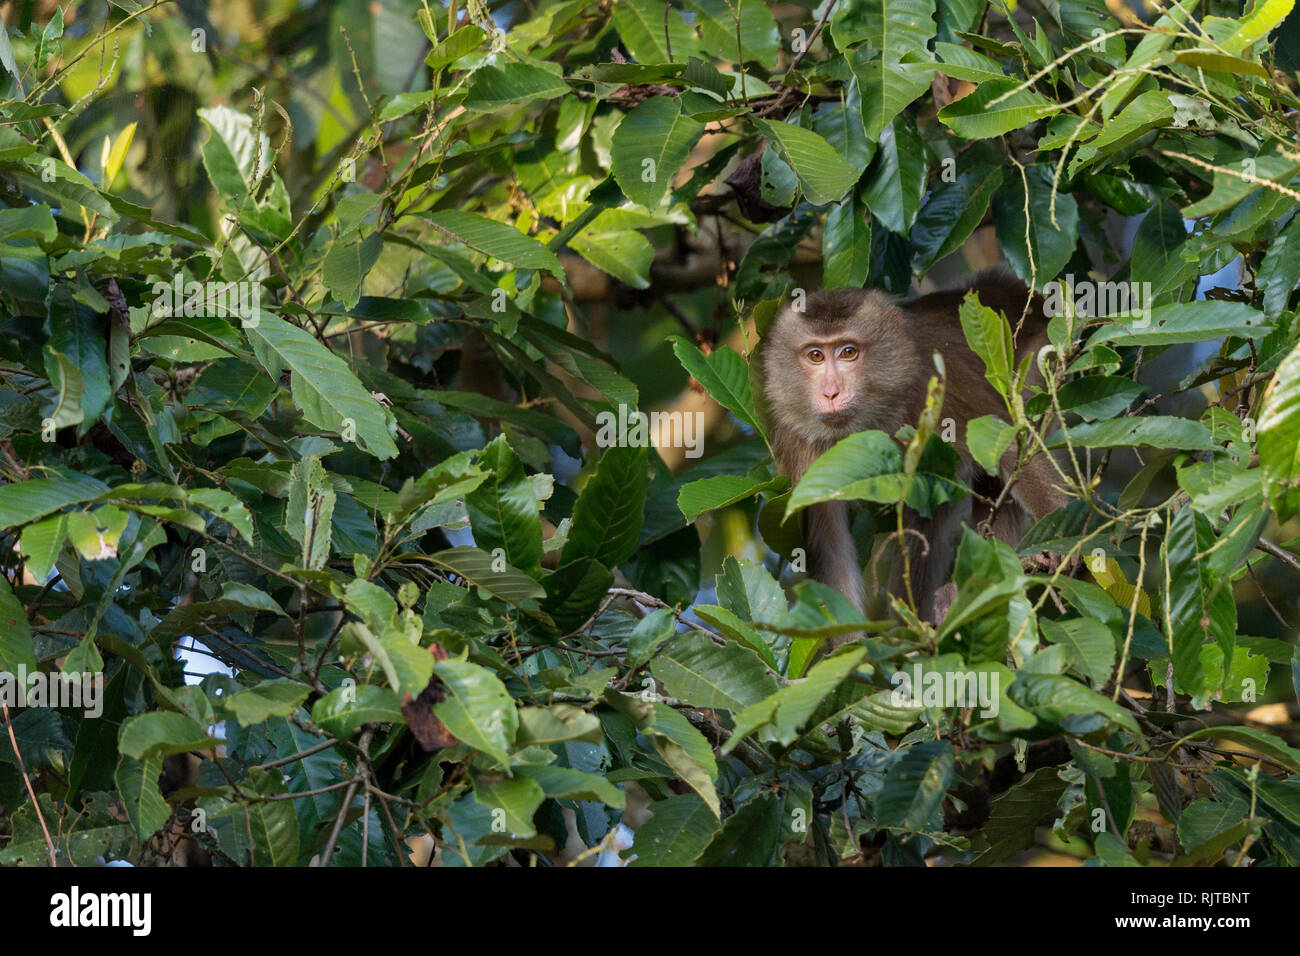 Northern Pig-tailed Macaque or Macaca leonina in Gibbon Wildlife Sanctuary Assam North East India Stock Photo